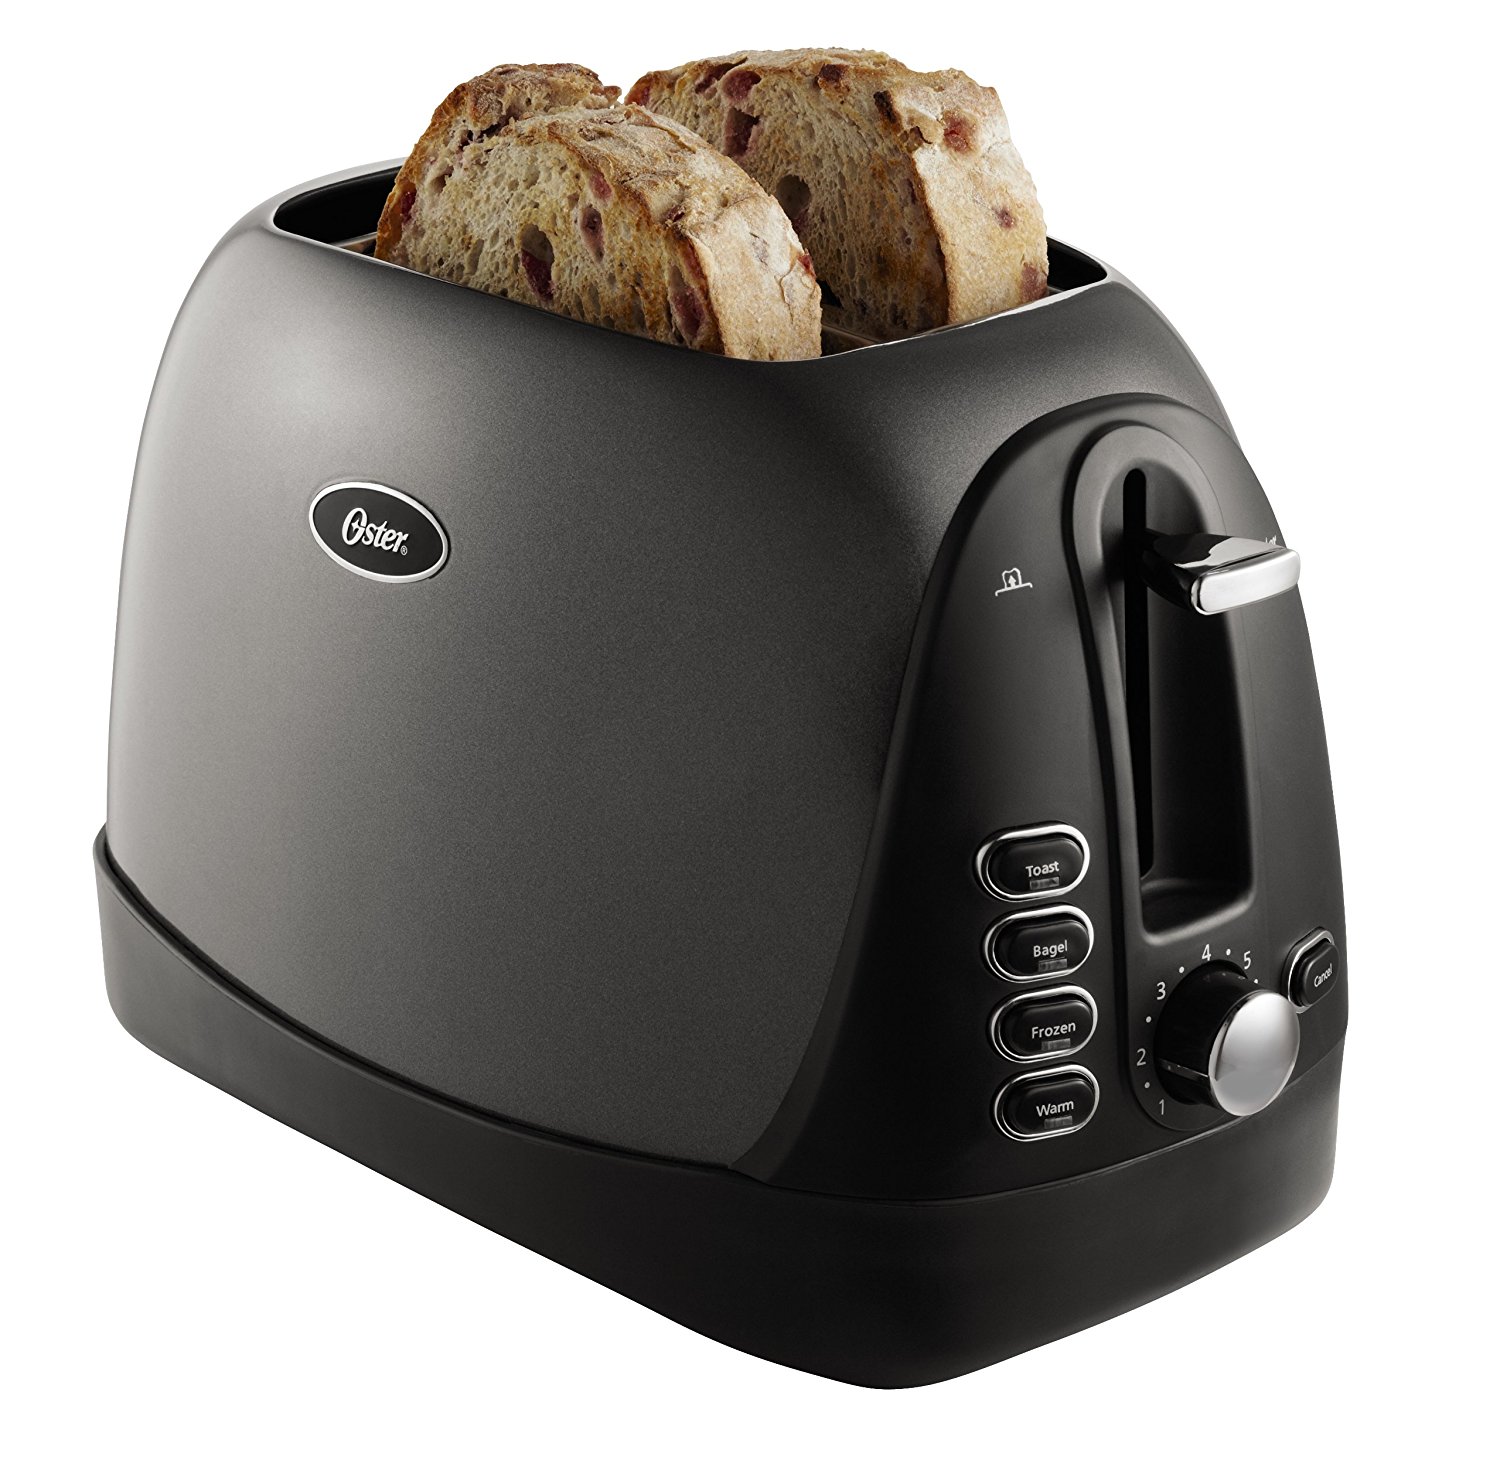 Oster Jelly Bean 2 Slice Toaster Only $15.00! (Reg $34.99)